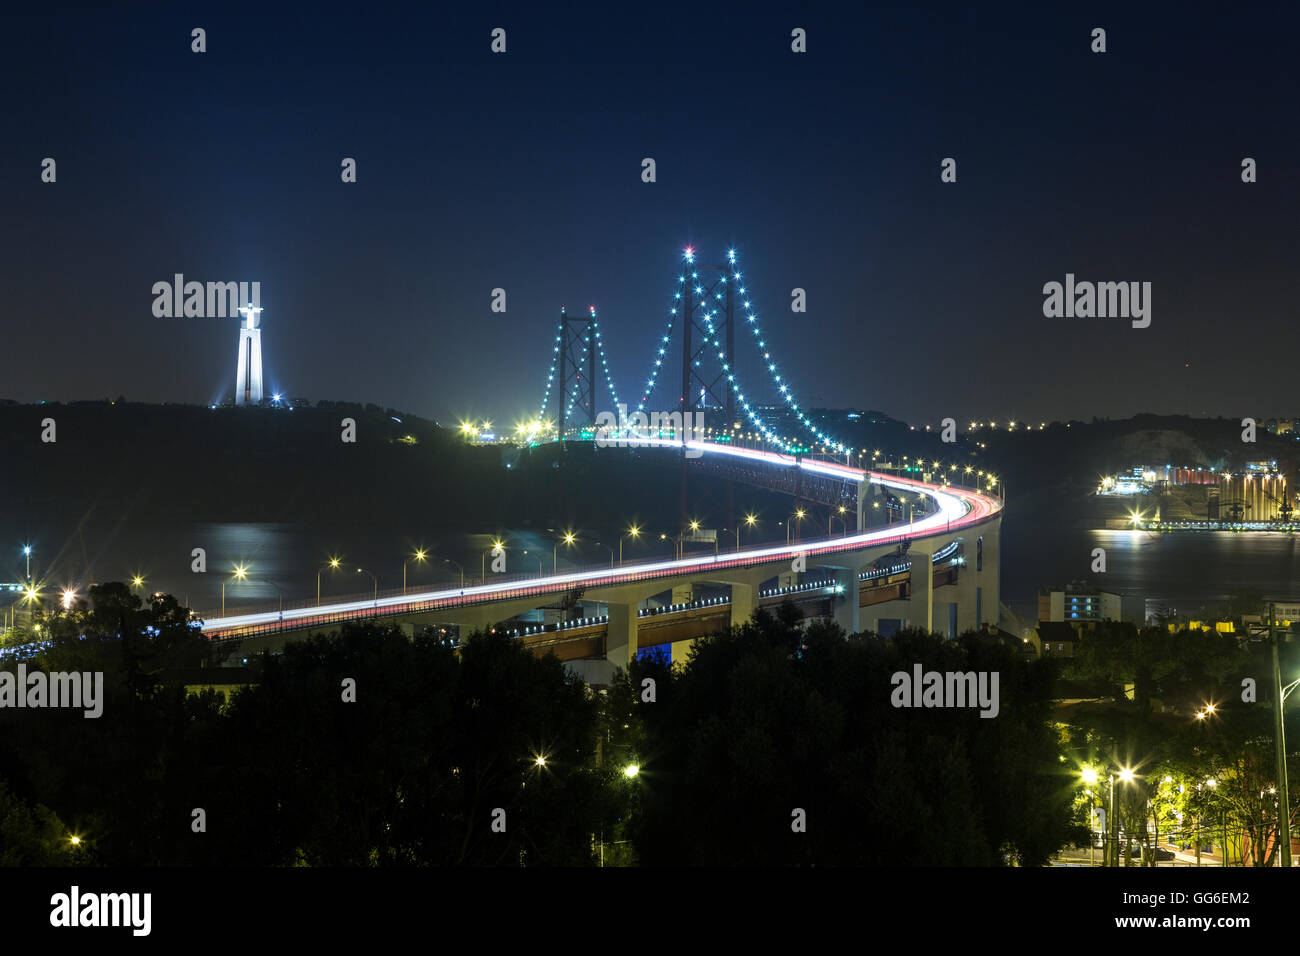 Night view of Ponte 25 de Abril, one of the largest suspension bridges in the world, Lisbon, Portugal, Europe Stock Photo